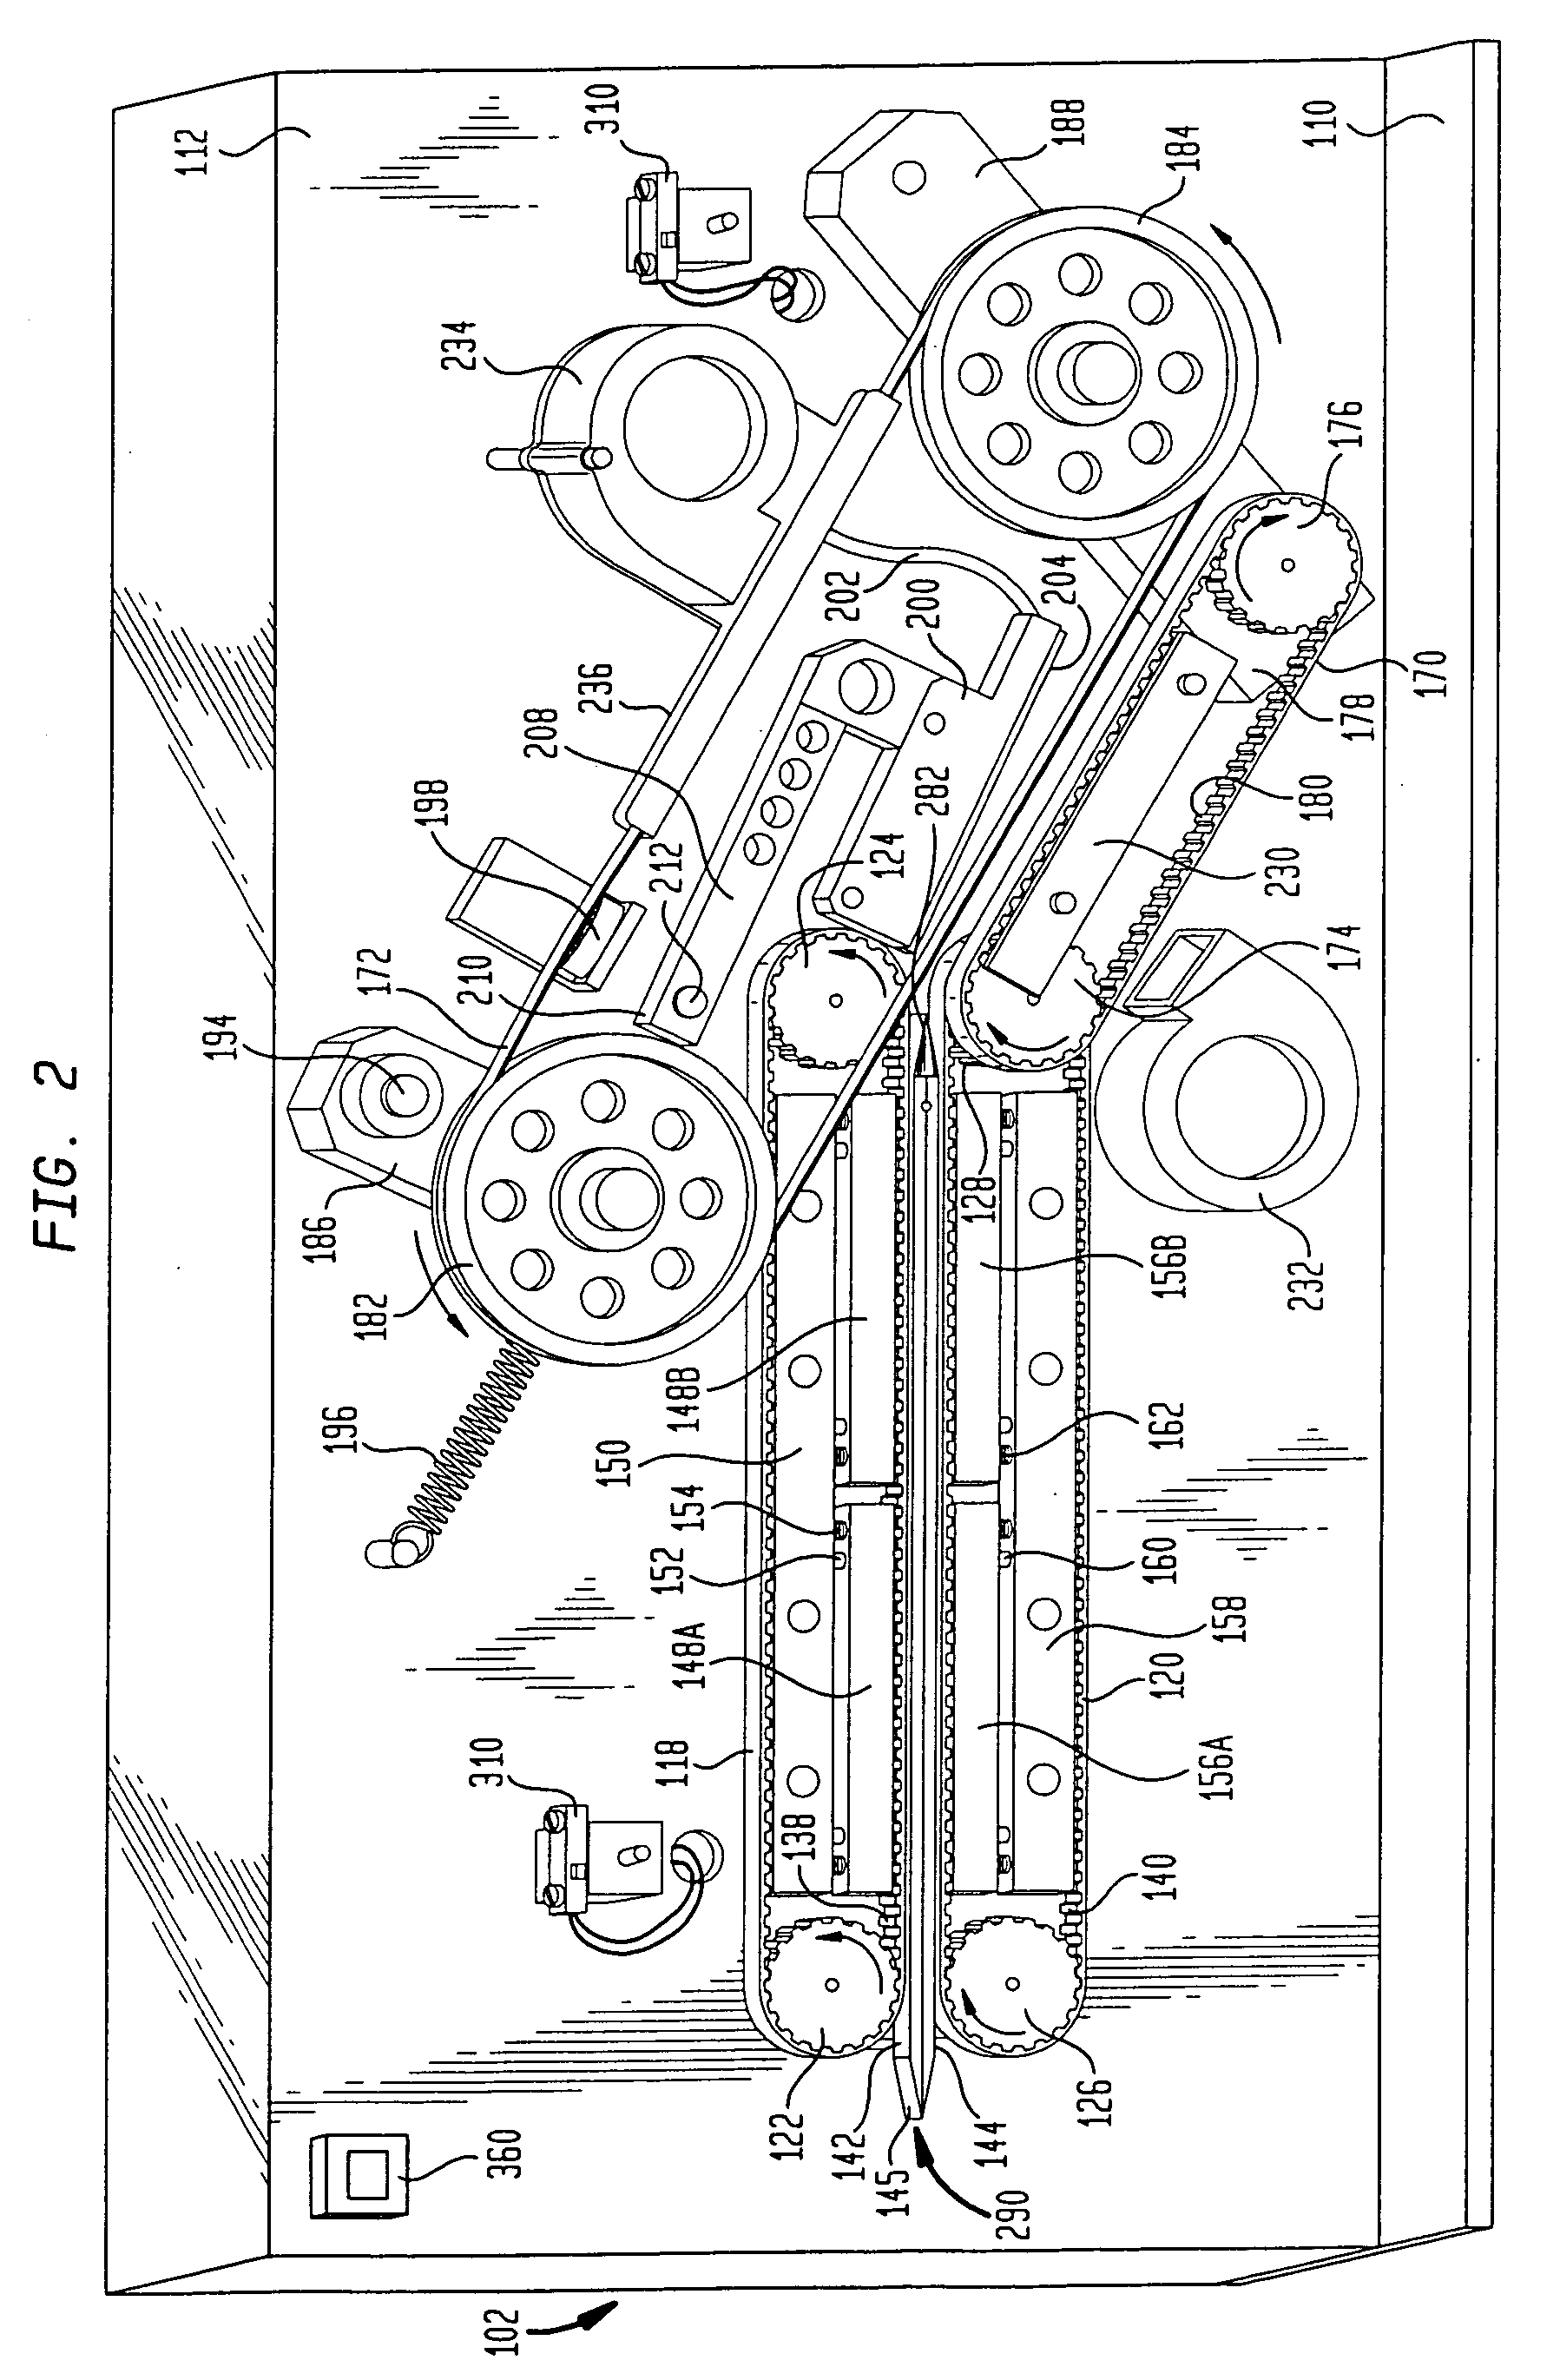 Apparatus for forming inflated packaging cushions